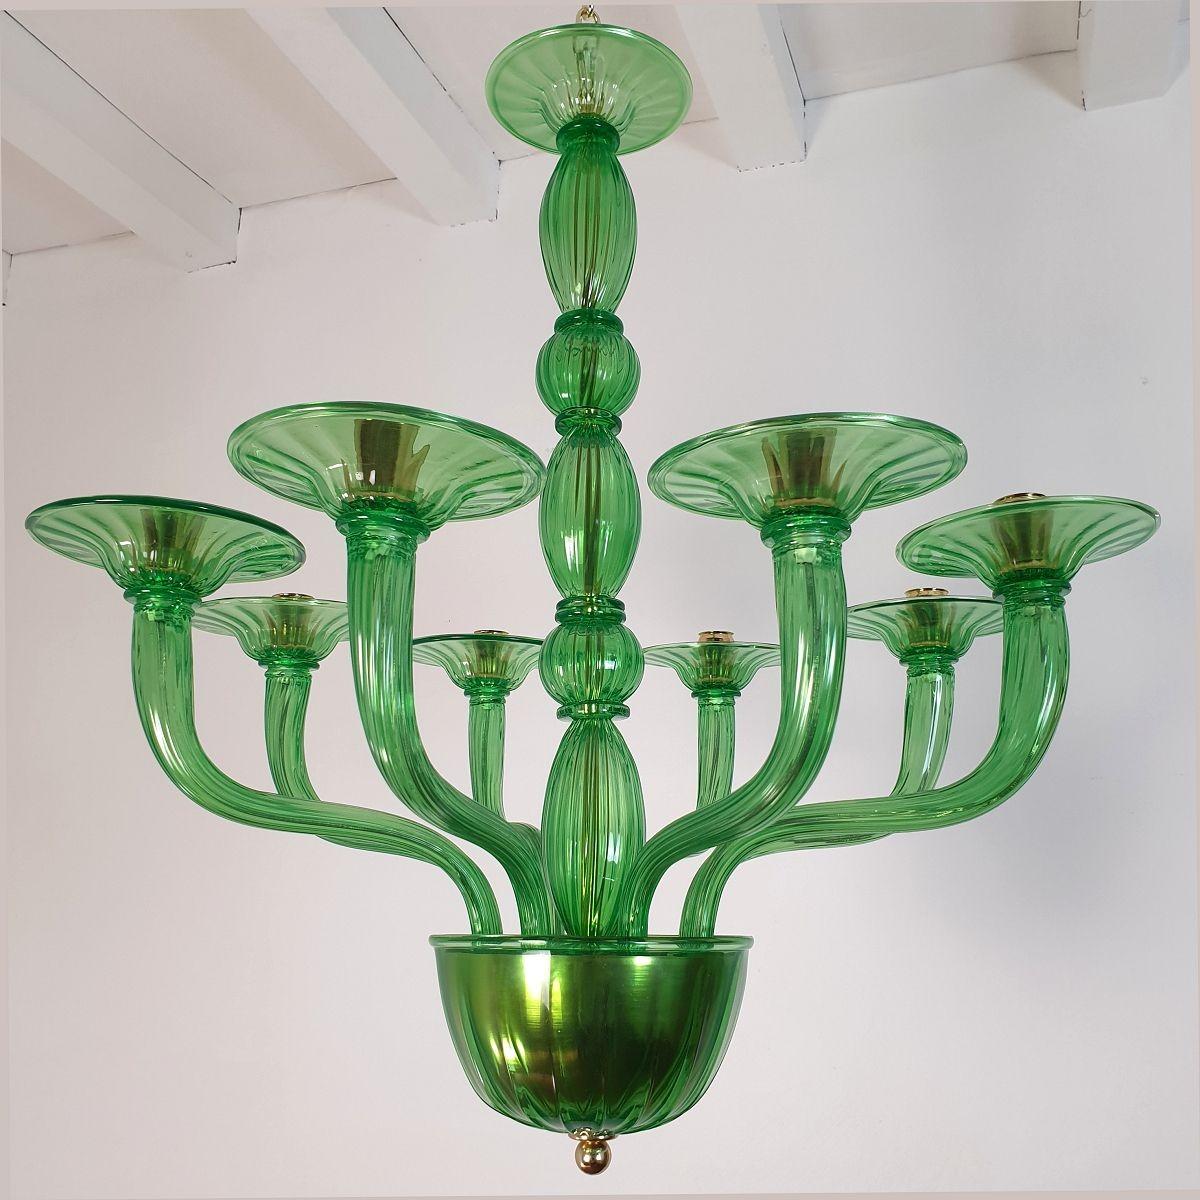 Green Murano glass chandelier, Mid Century Modern In Excellent Condition For Sale In Dallas, TX